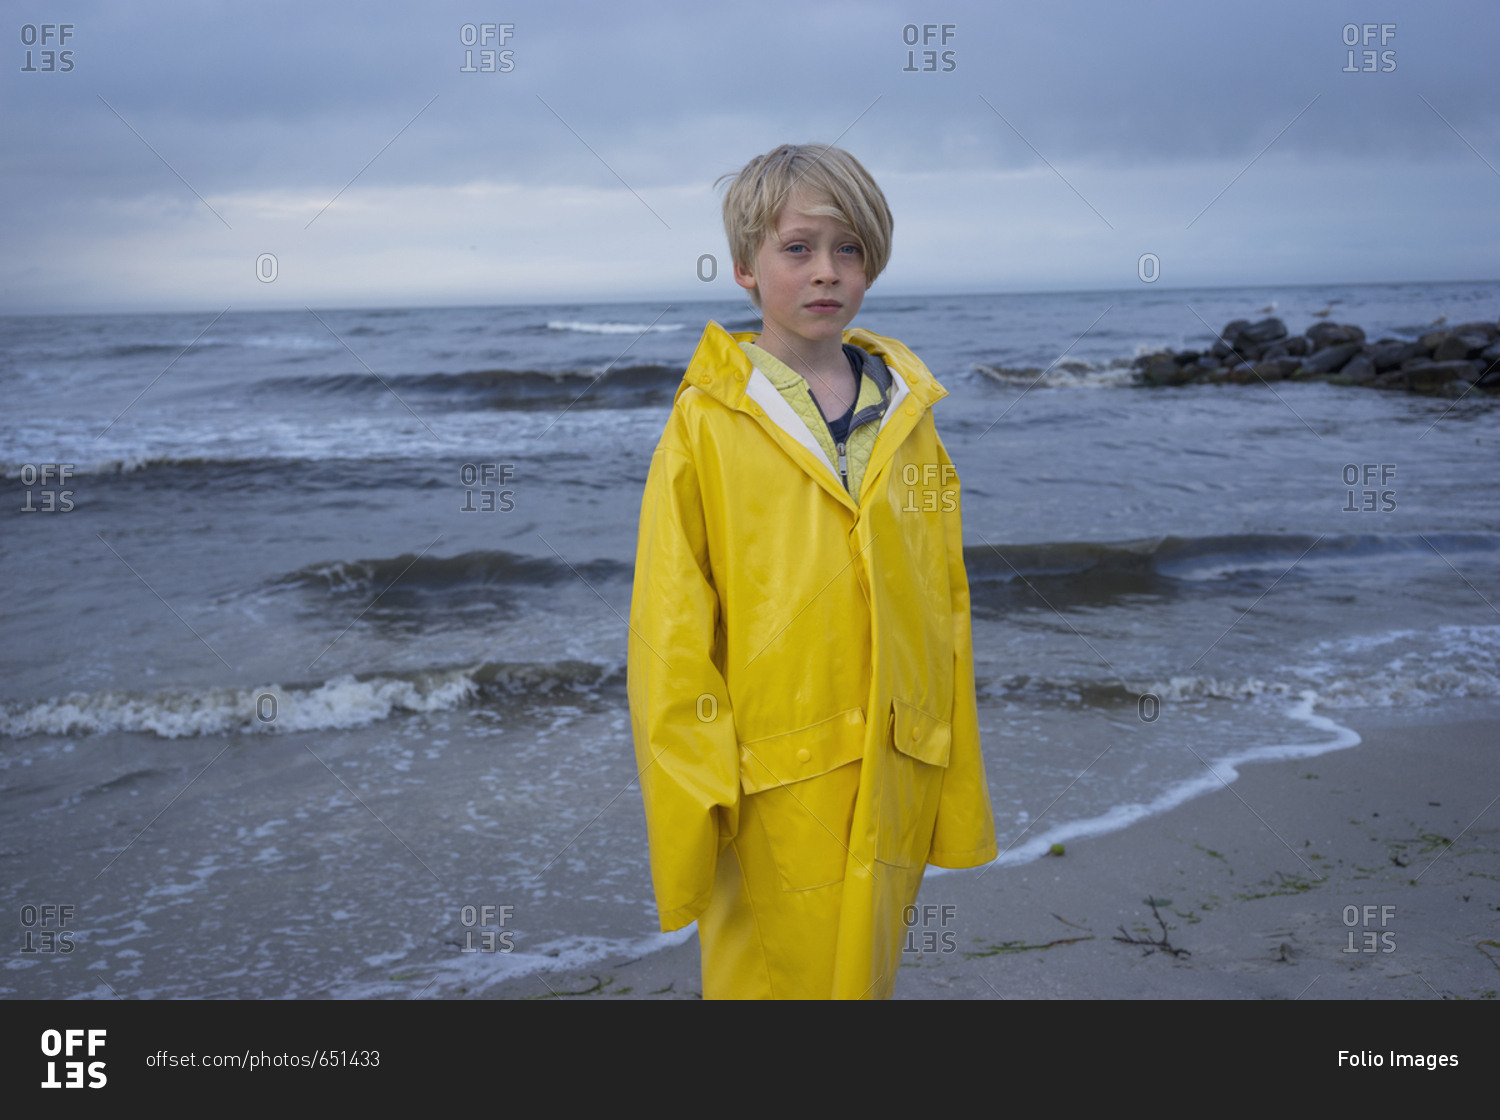 A young boy at the beach in wet weather gear